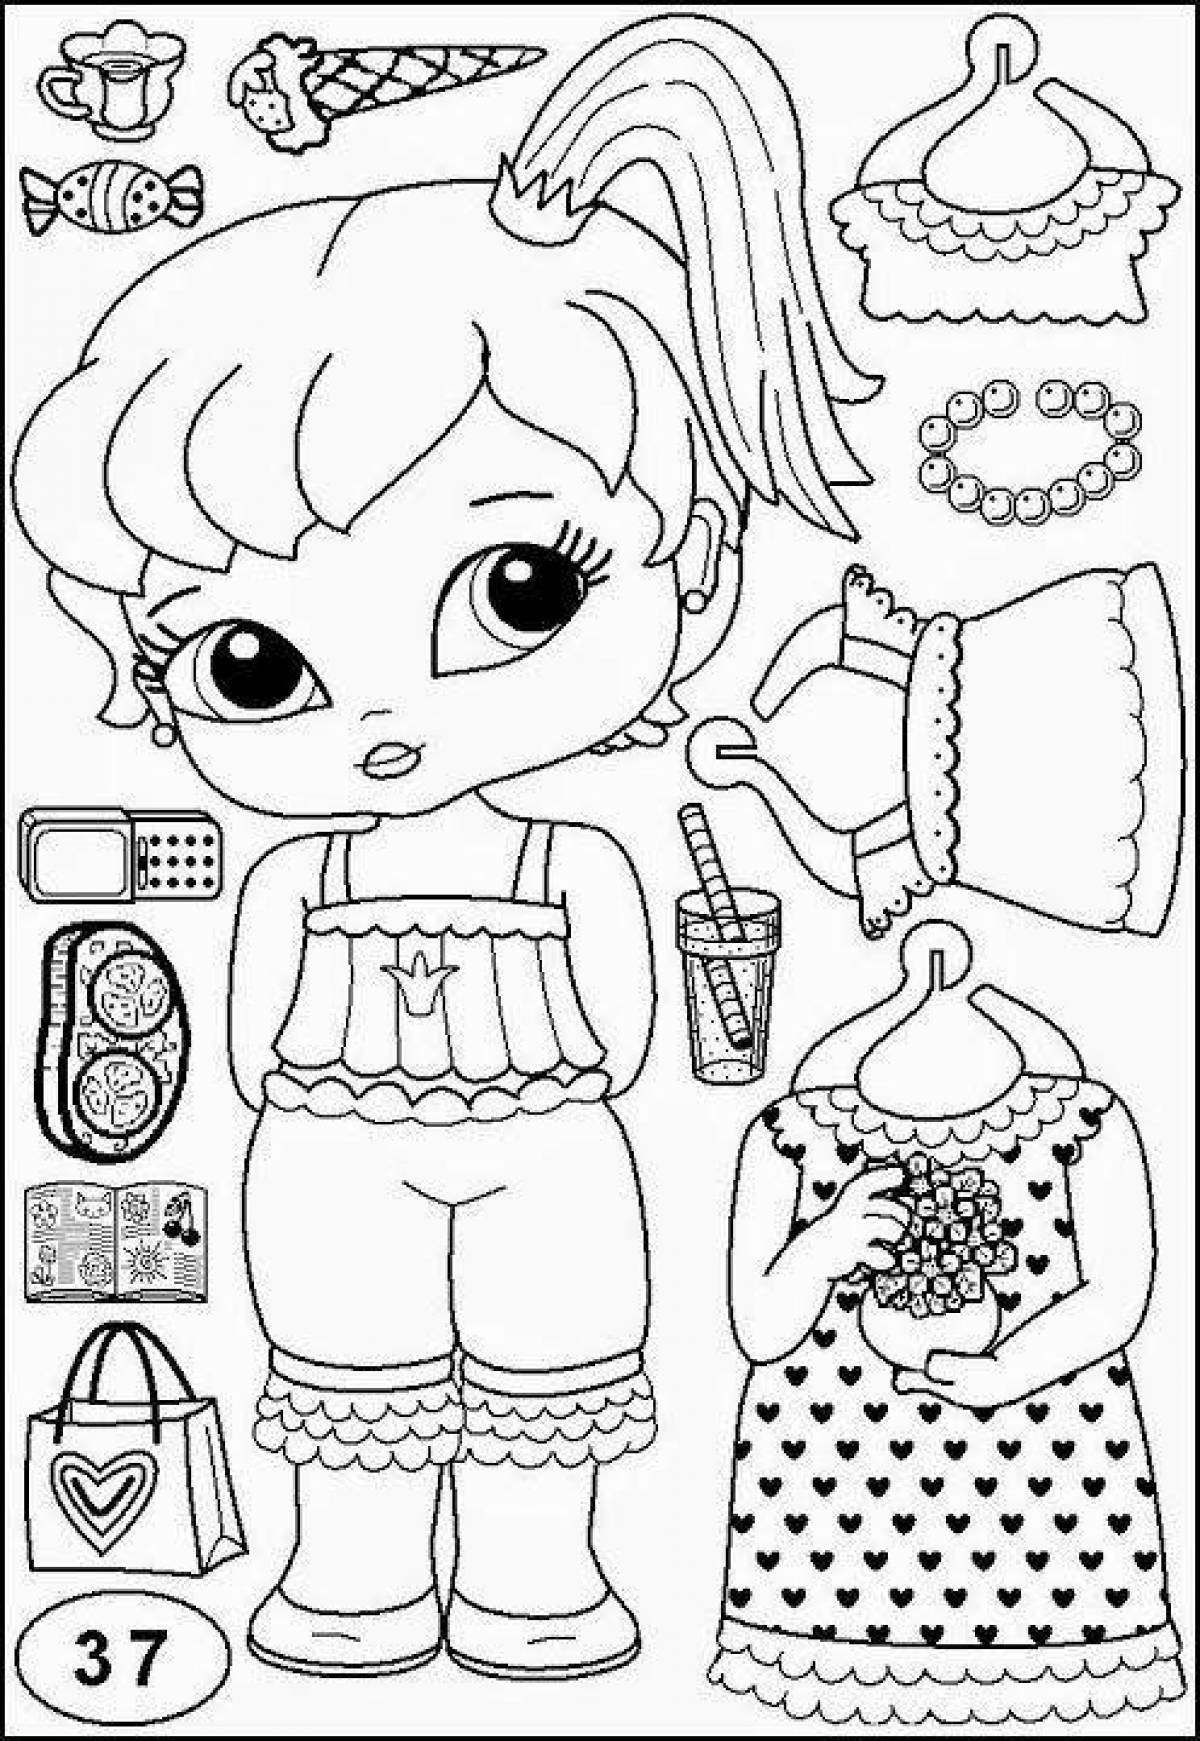 Amazing lol doll coloring book with clothes